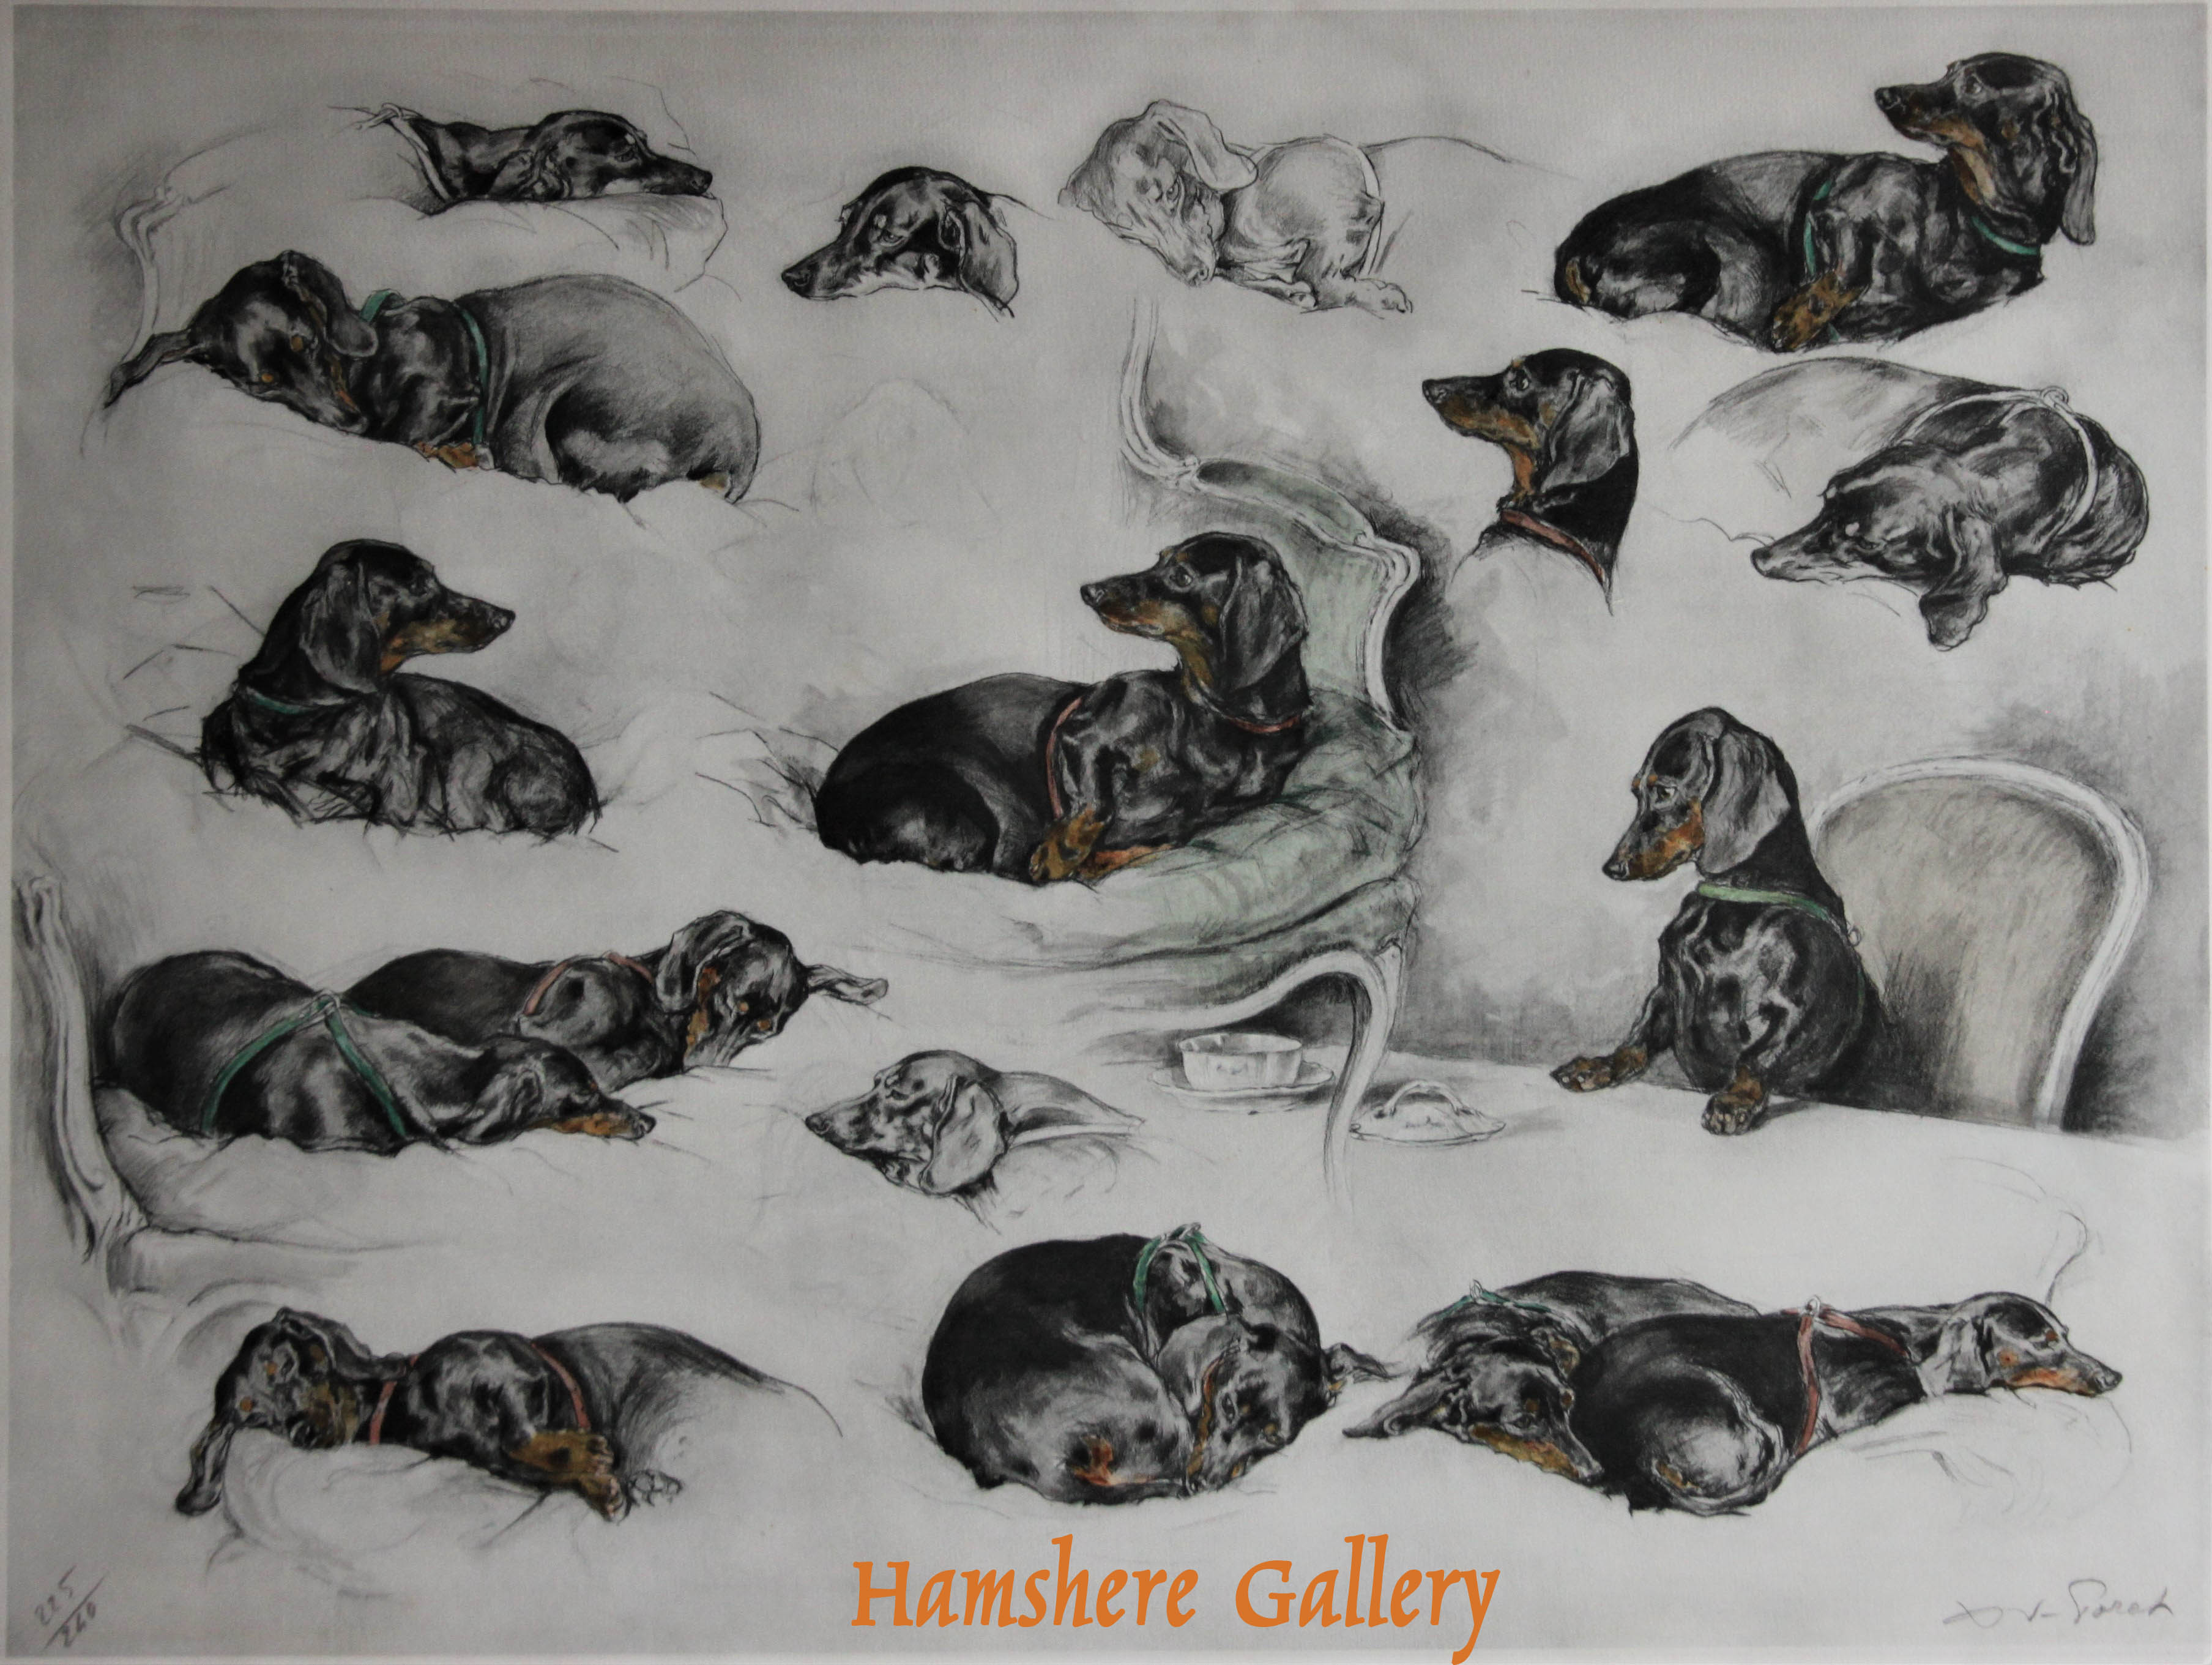 Click to see full size: “Les Teckels” / “Bassets Allemands”, lithograph of Dachshunds after Xavier de Poret (French, 1894 - 1975)